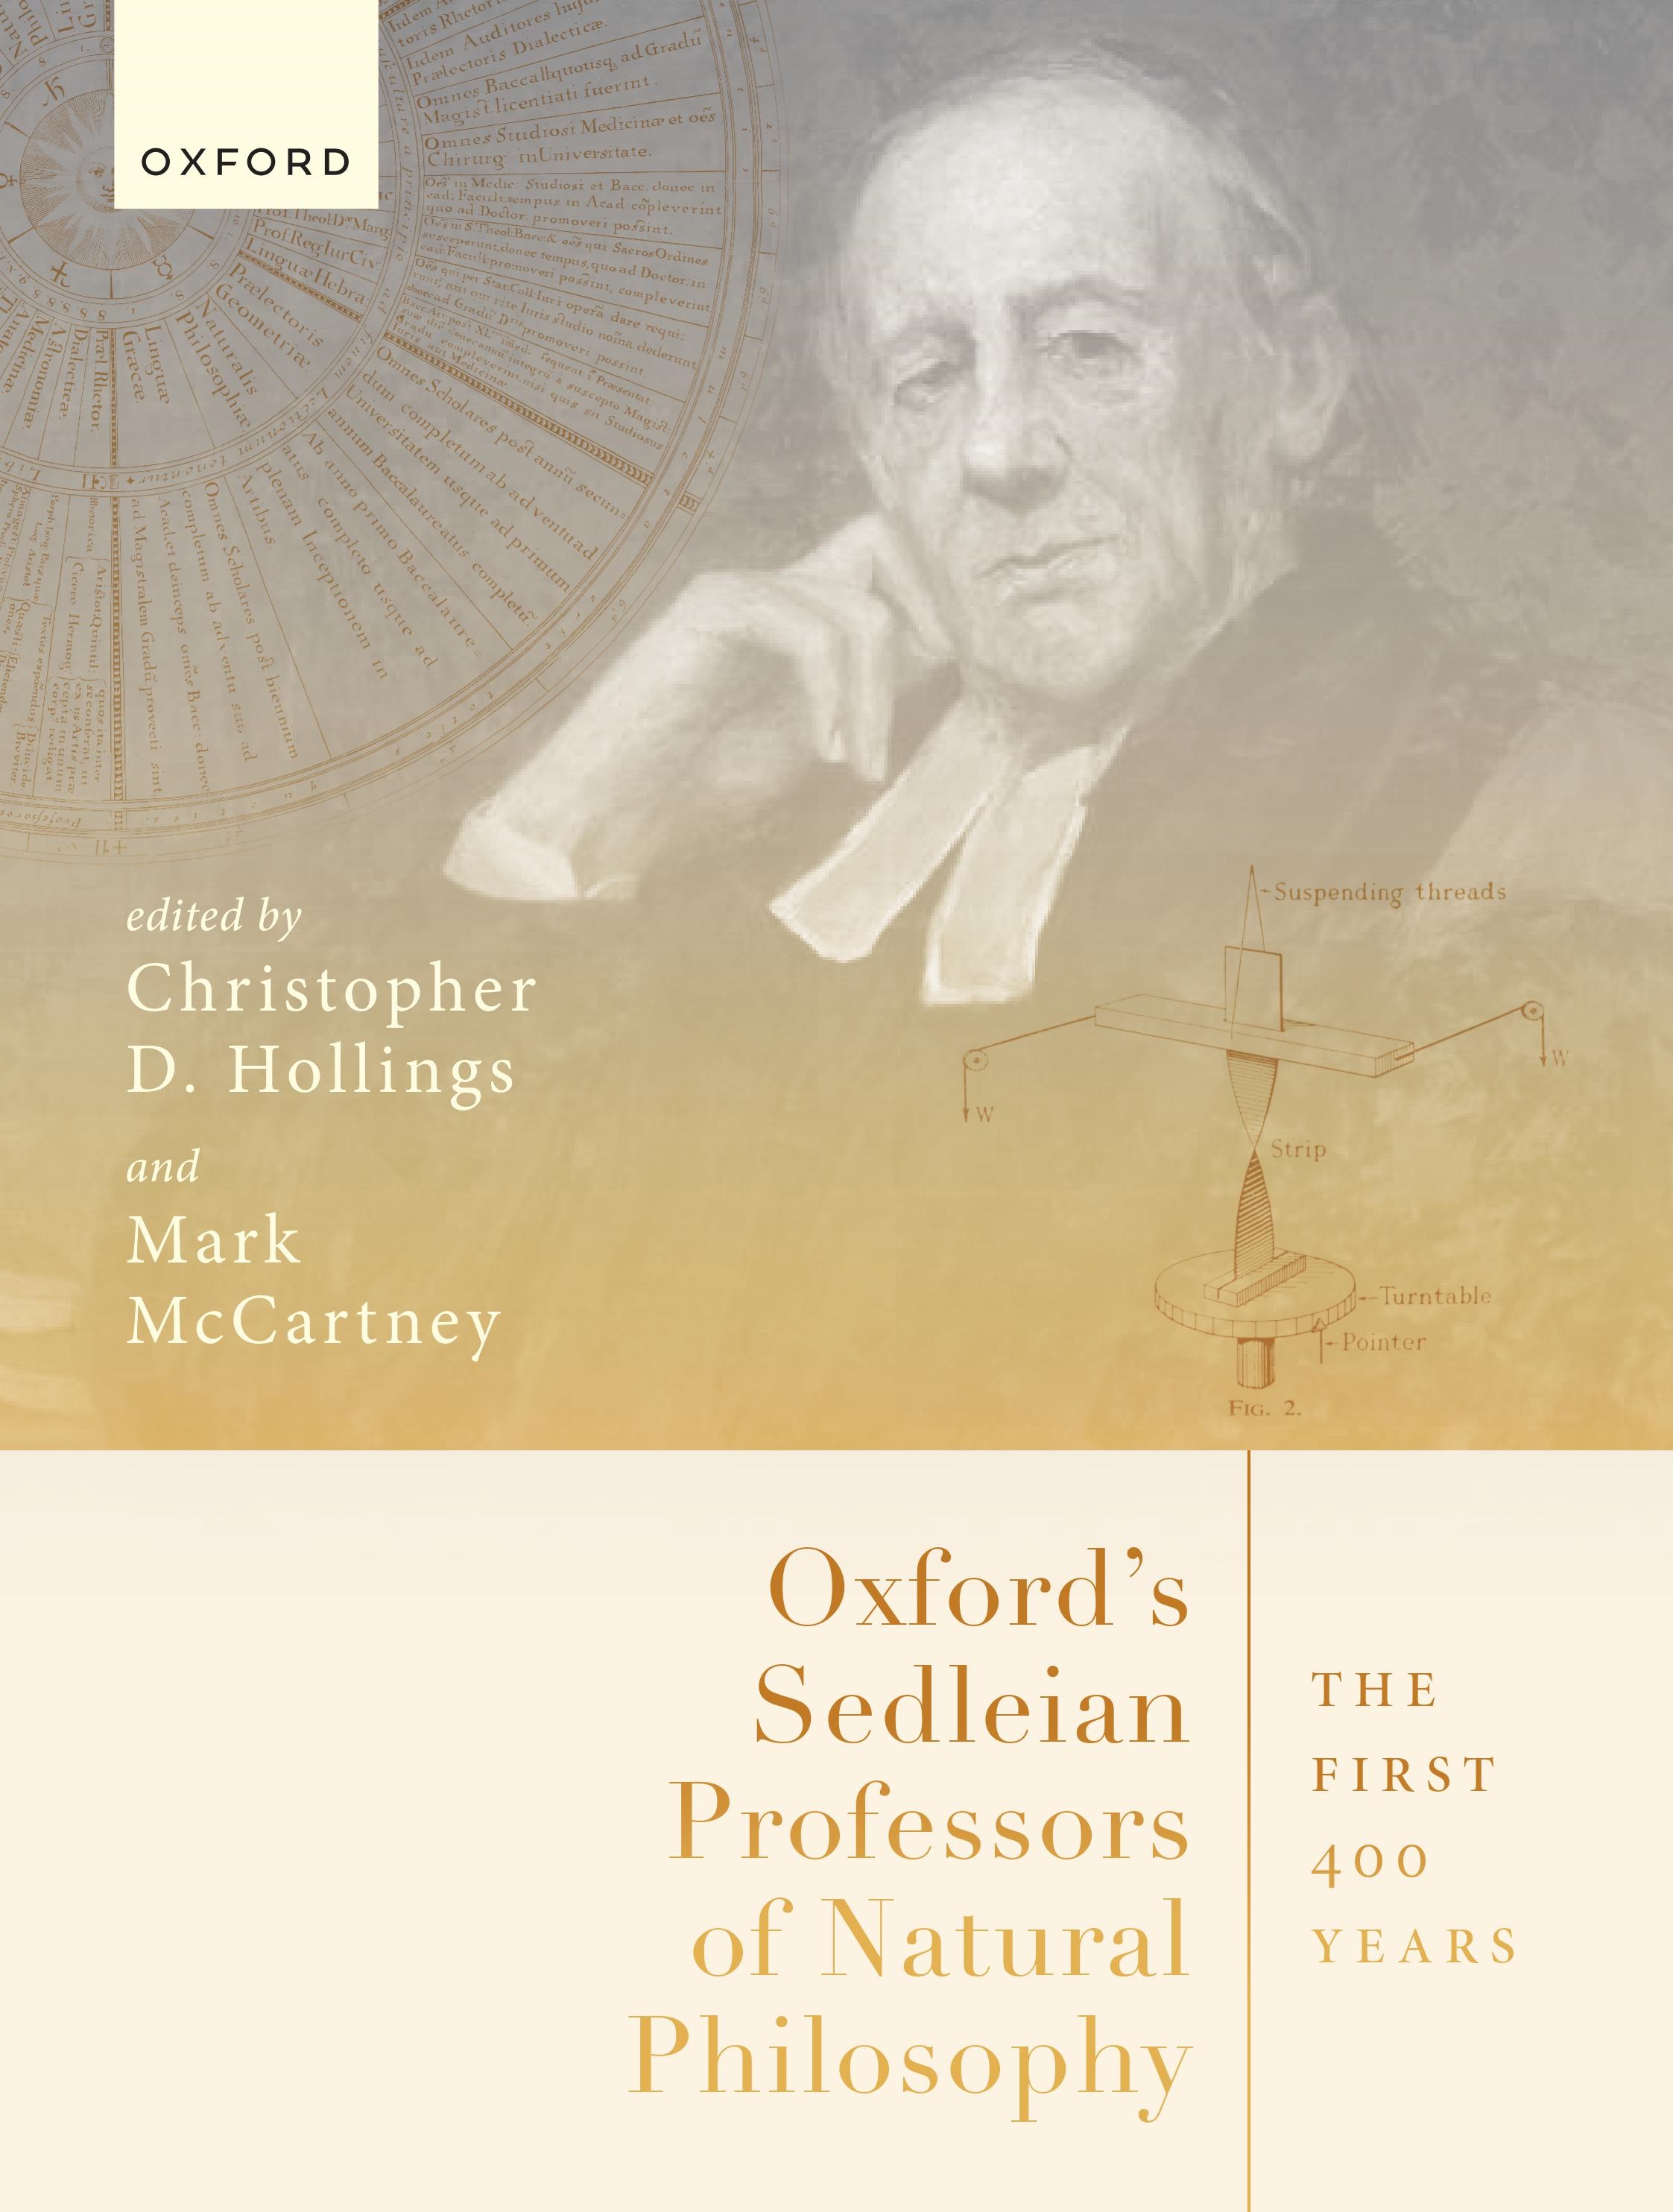 Front cover of Oxford’s Sedleian Professors of Natural Philosophy: The First 400 Years book showing